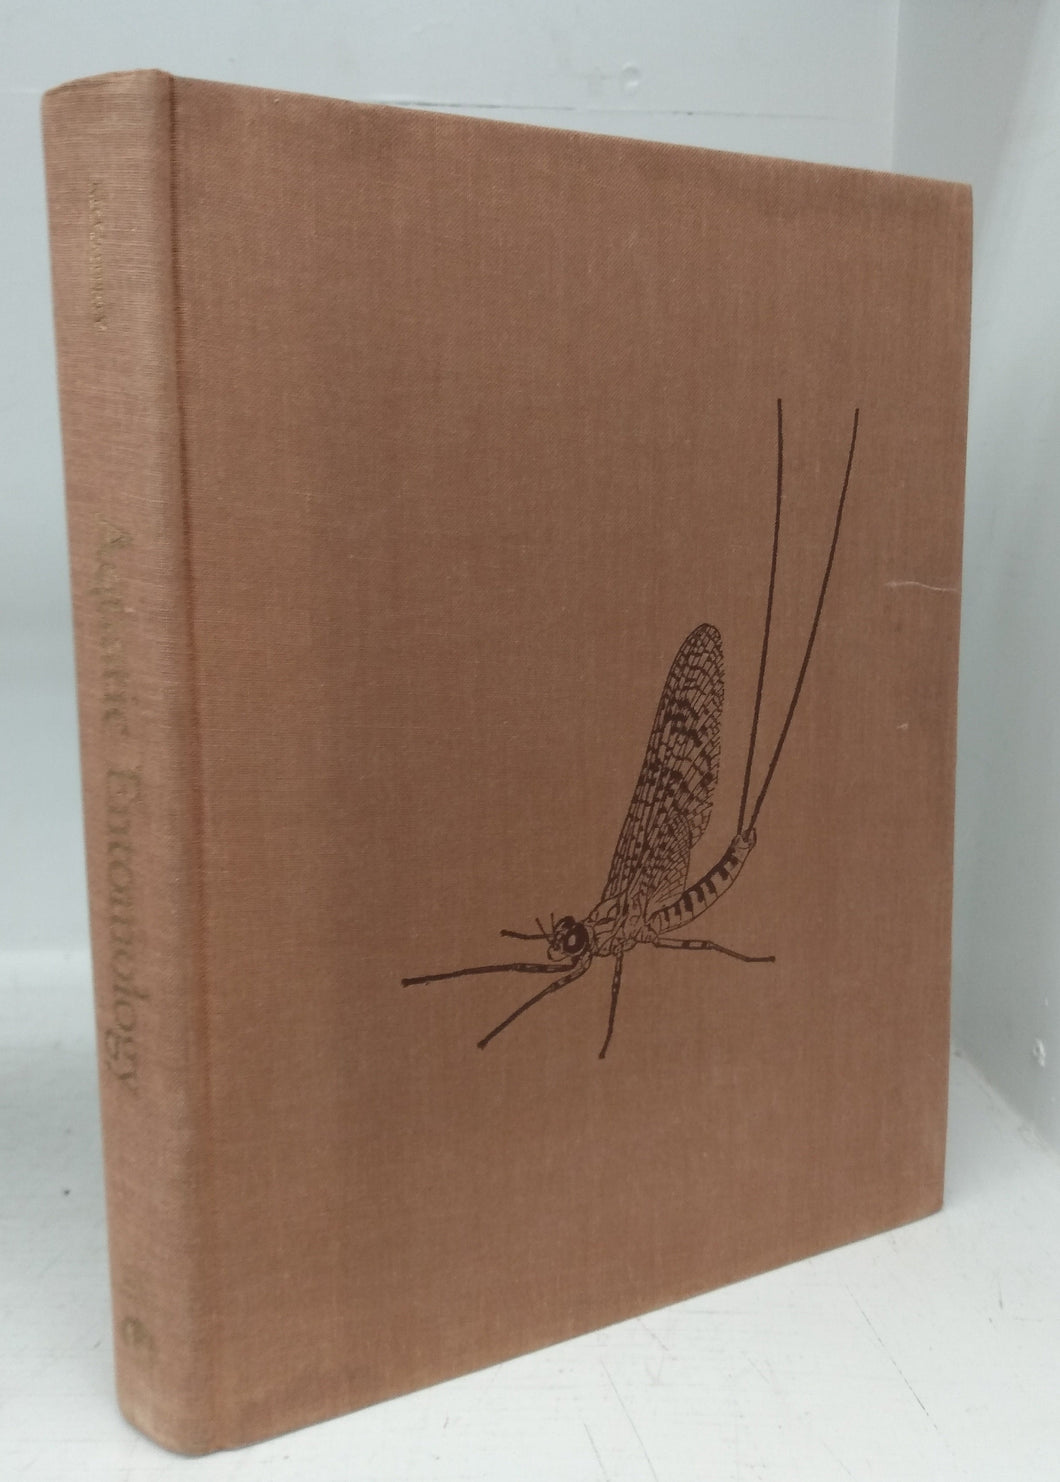 Aquatic Entomology: The Fishermen's and Ecologists' Illustrated Guide to Insects and their Relatives